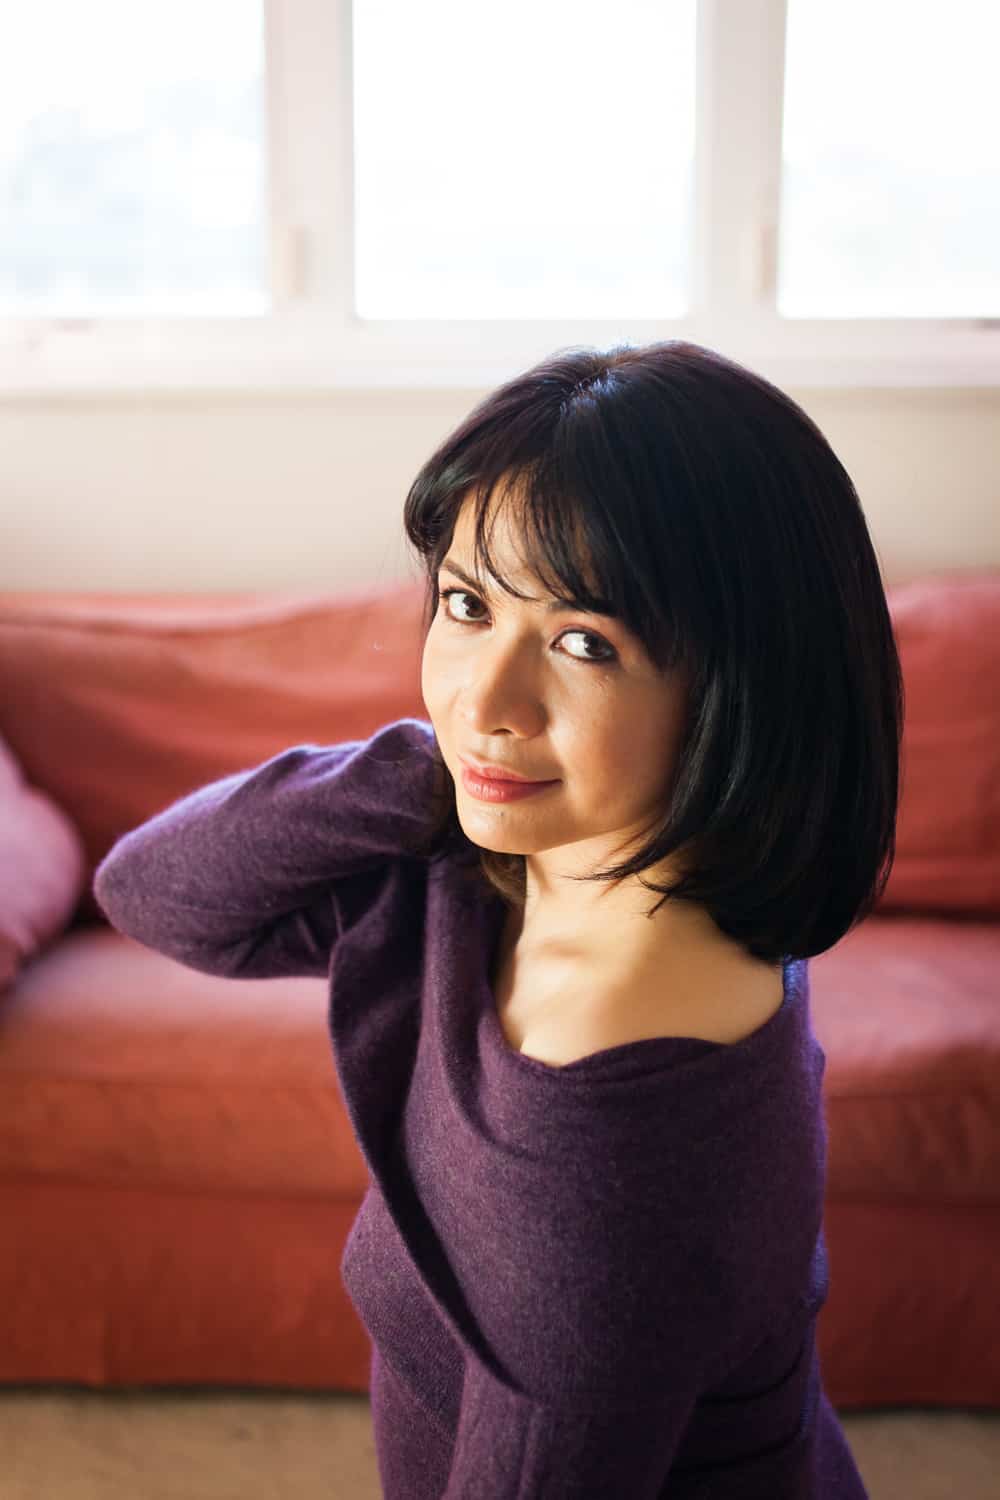 Woman with short black hair wearing purple off-shoulder sweater